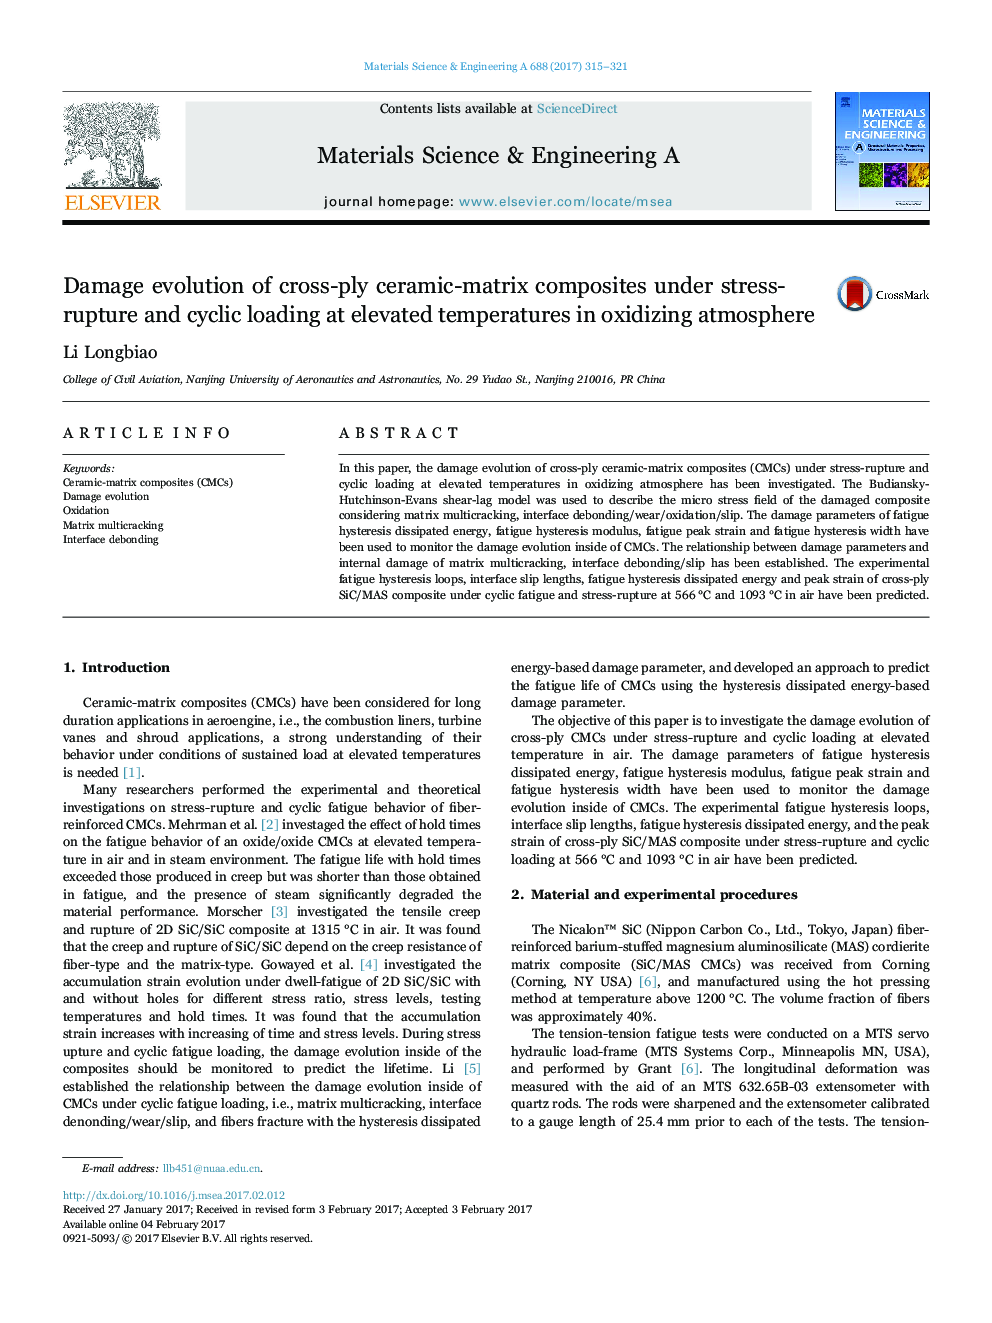 Damage evolution of cross-ply ceramic-matrix composites under stress-rupture and cyclic loading at elevated temperatures in oxidizing atmosphere